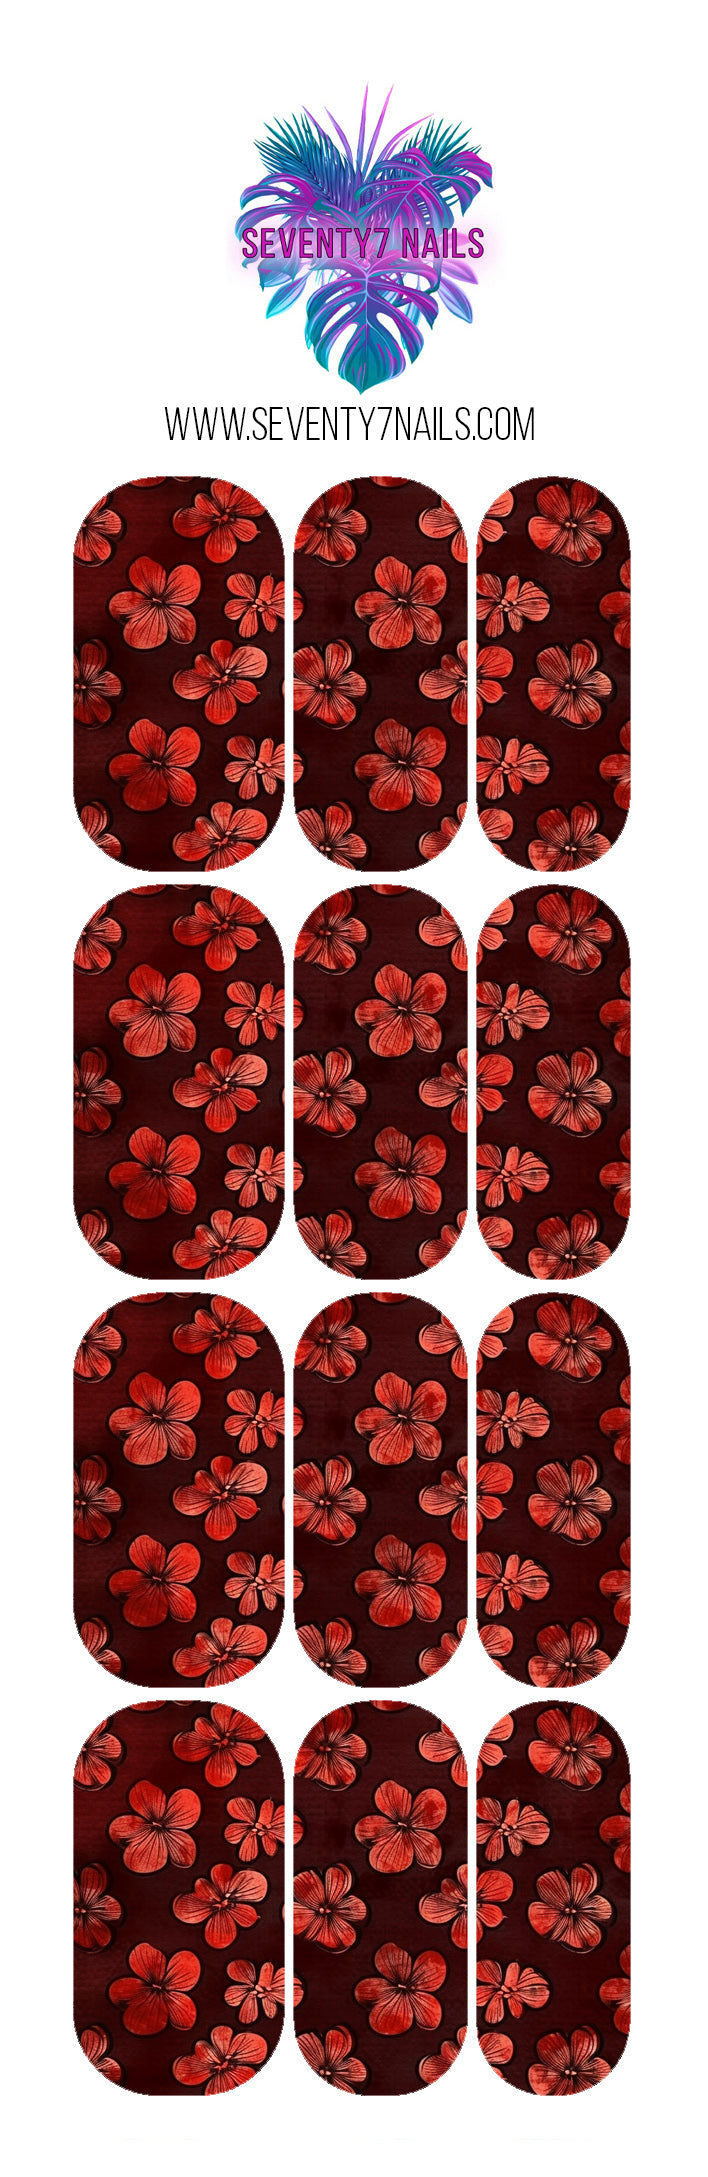 Waterslide Nail Decals - Red Floral